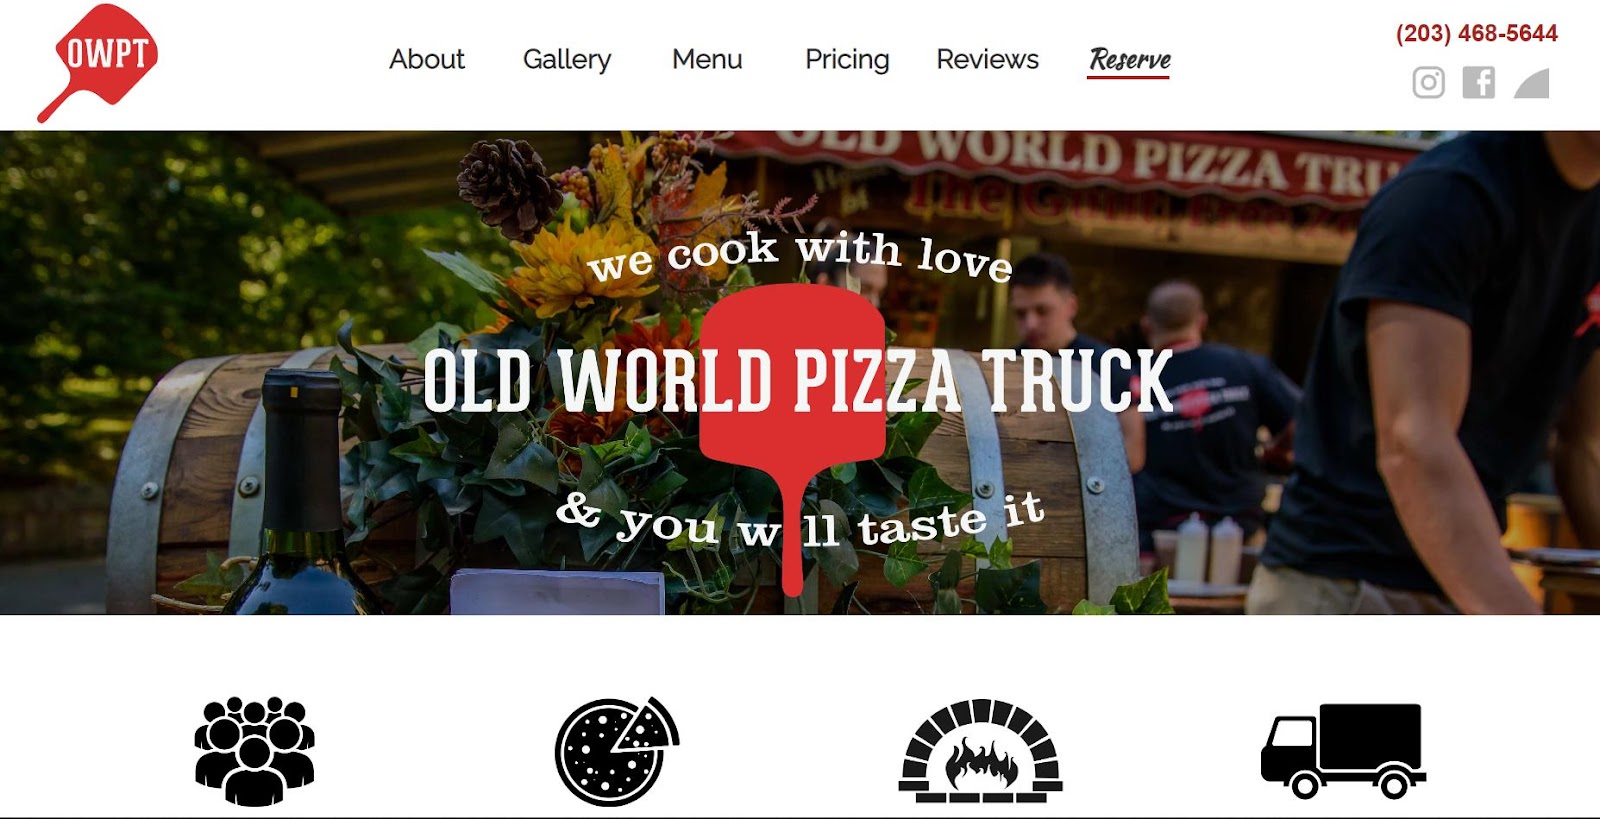 Food truck website design example from Old World Pizza truck.